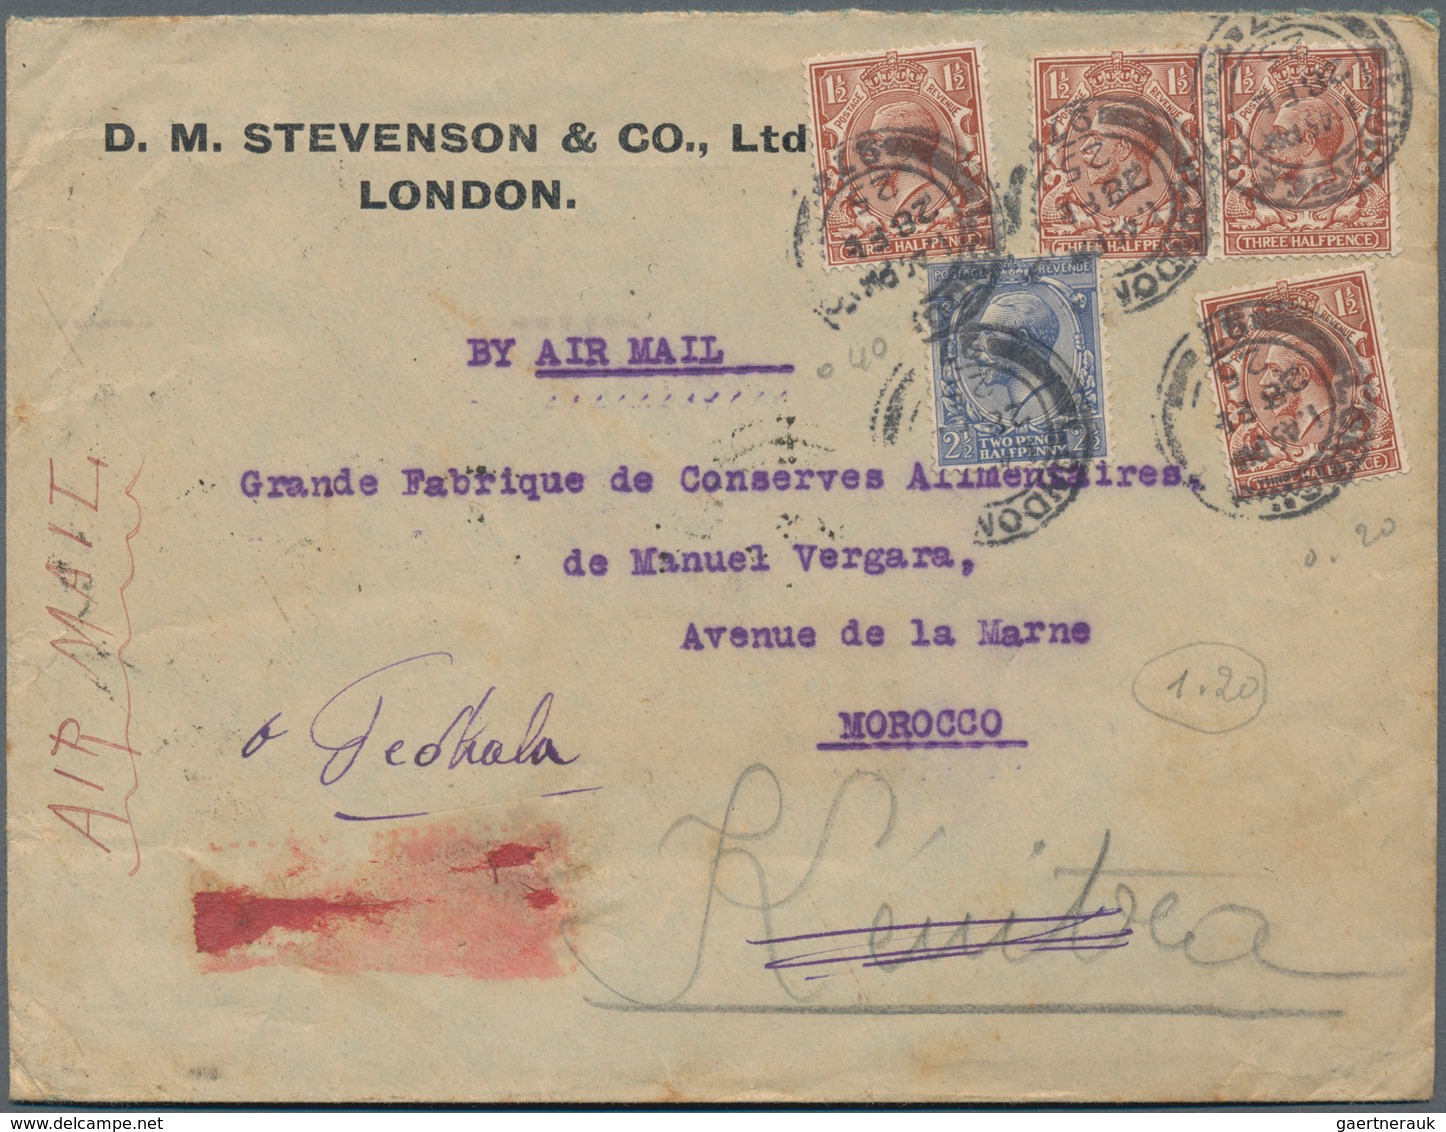 Großbritannien: 1910/1950 (ca.), mainly KGVI, lot of apprx. 350 covers/cards, incl. stationeries, ca